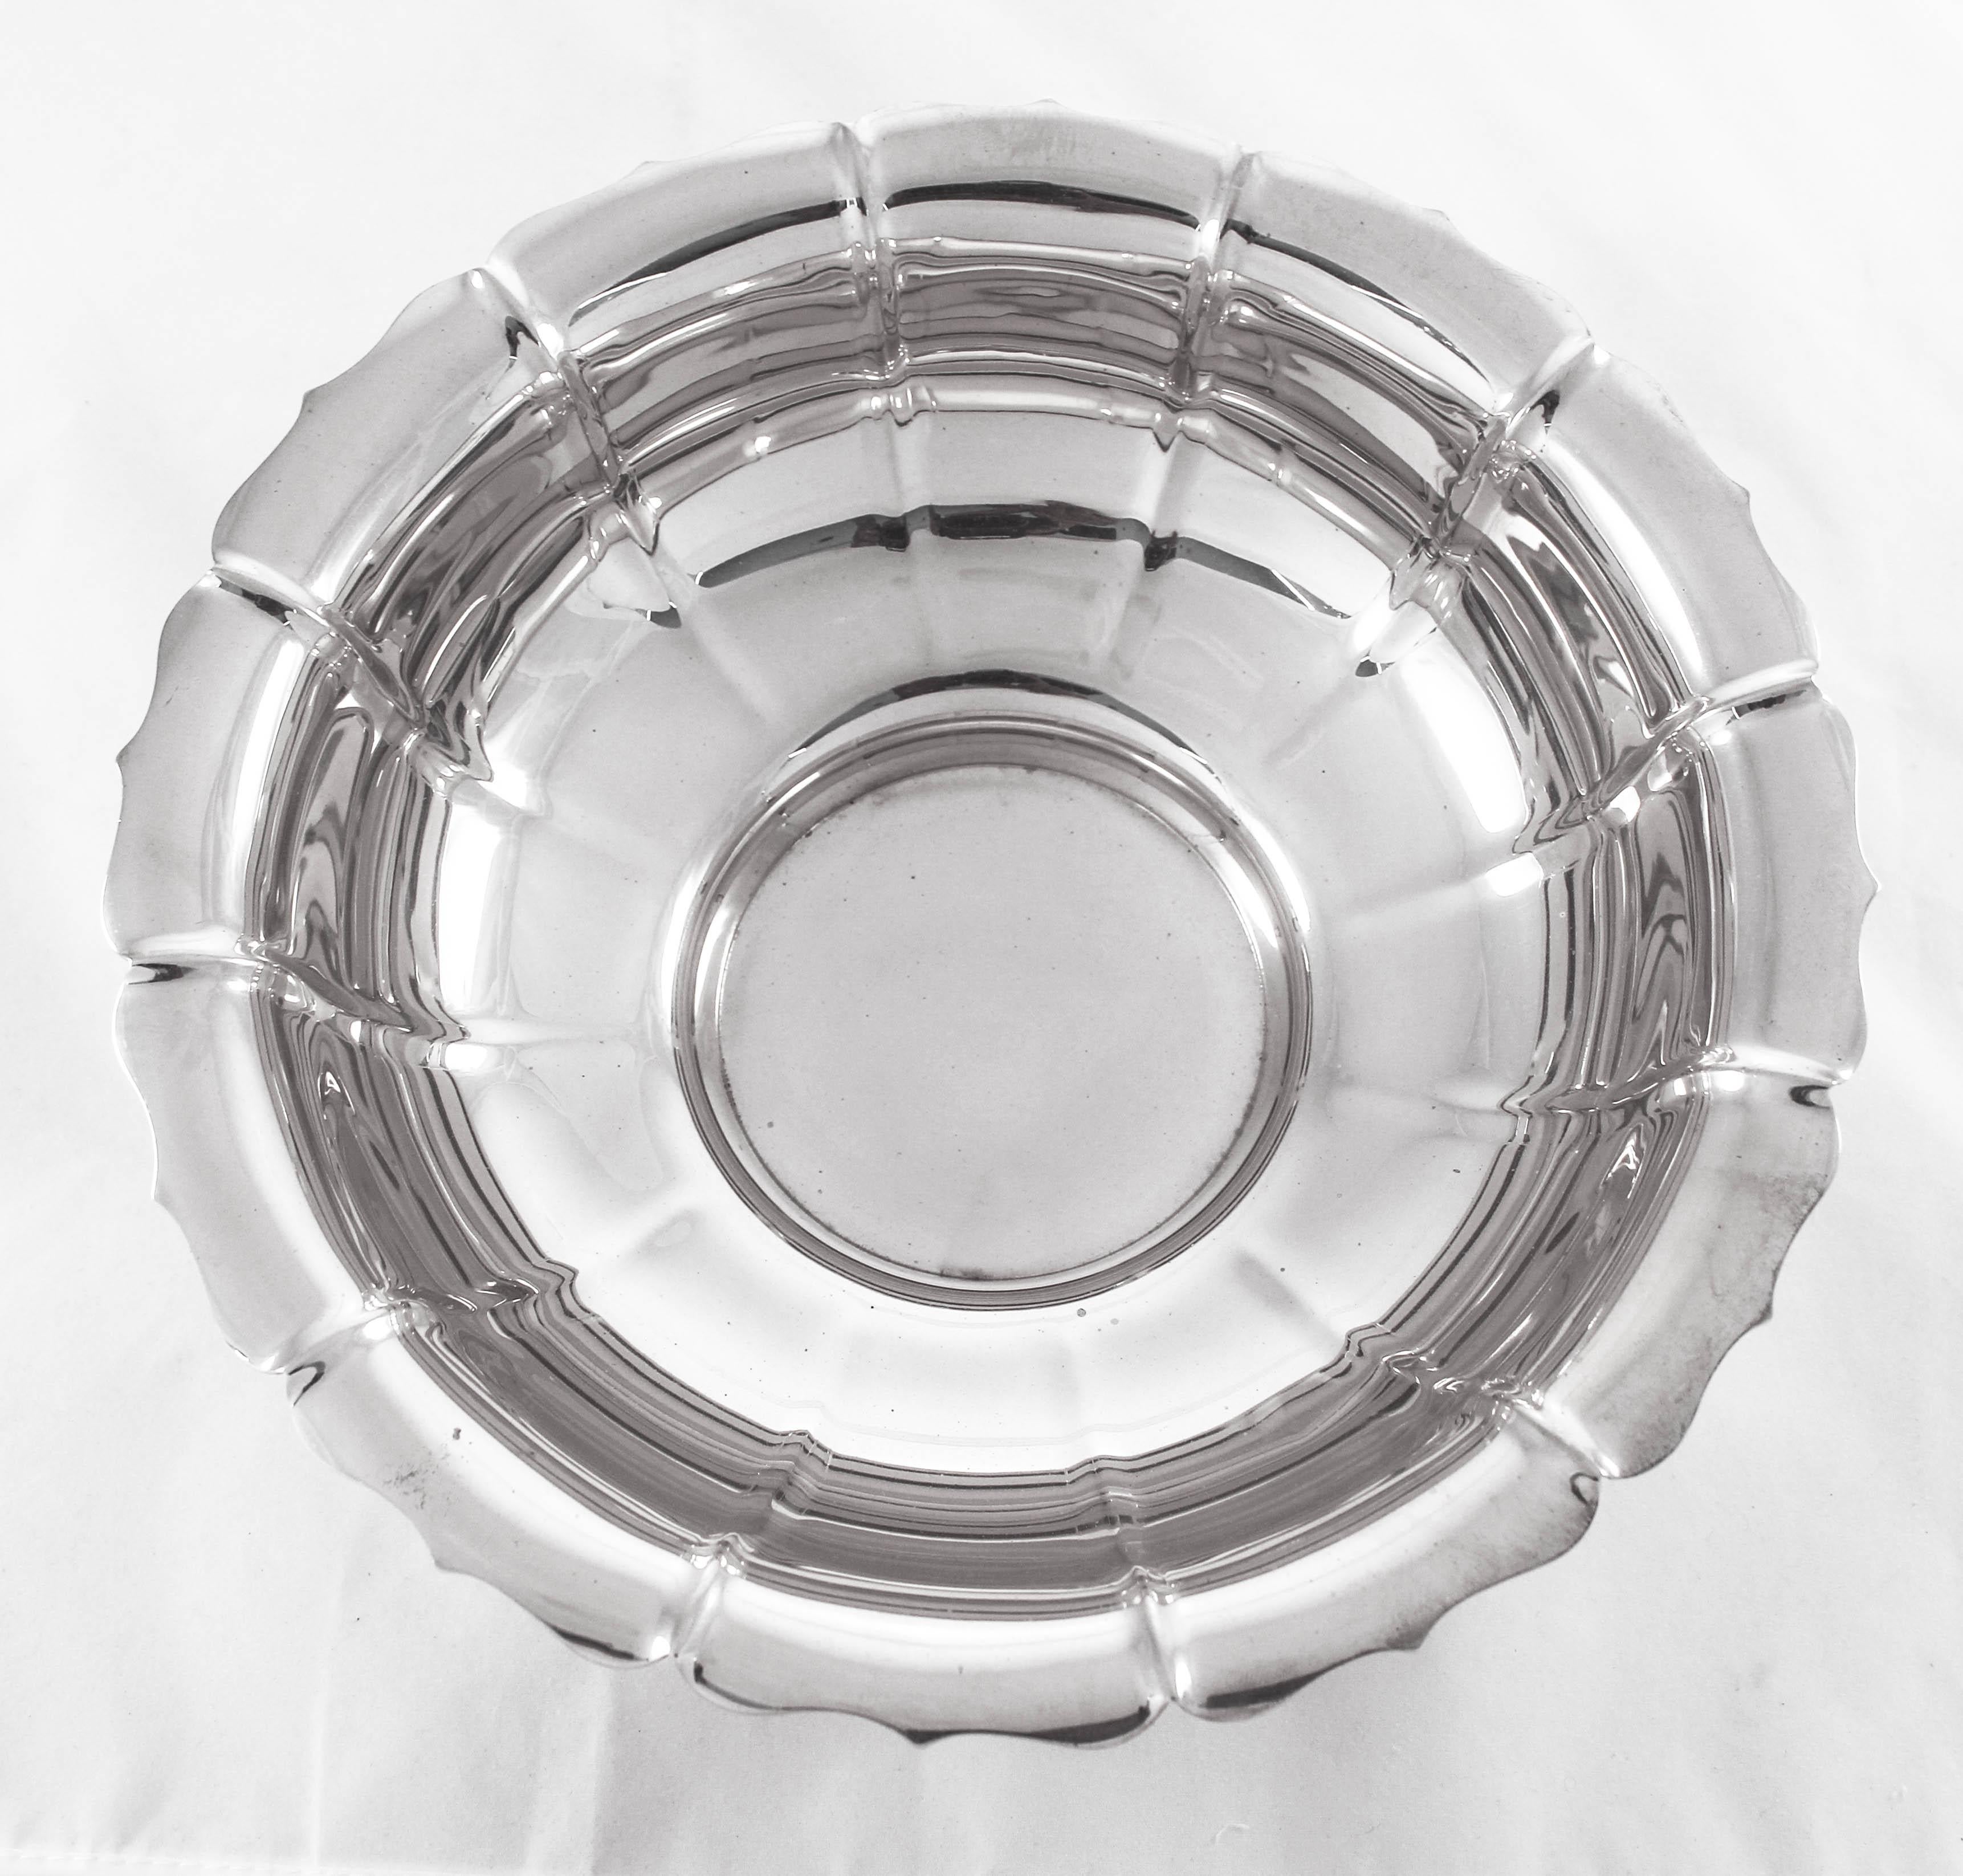 This sterling bowl has a scalloped edge and a modern sleek design. The bowl stands on a center pedestal, raising it off the surface. It’s a piece that can be used for just about anything; from hot food to cold fruit. It’s a practical size, and can